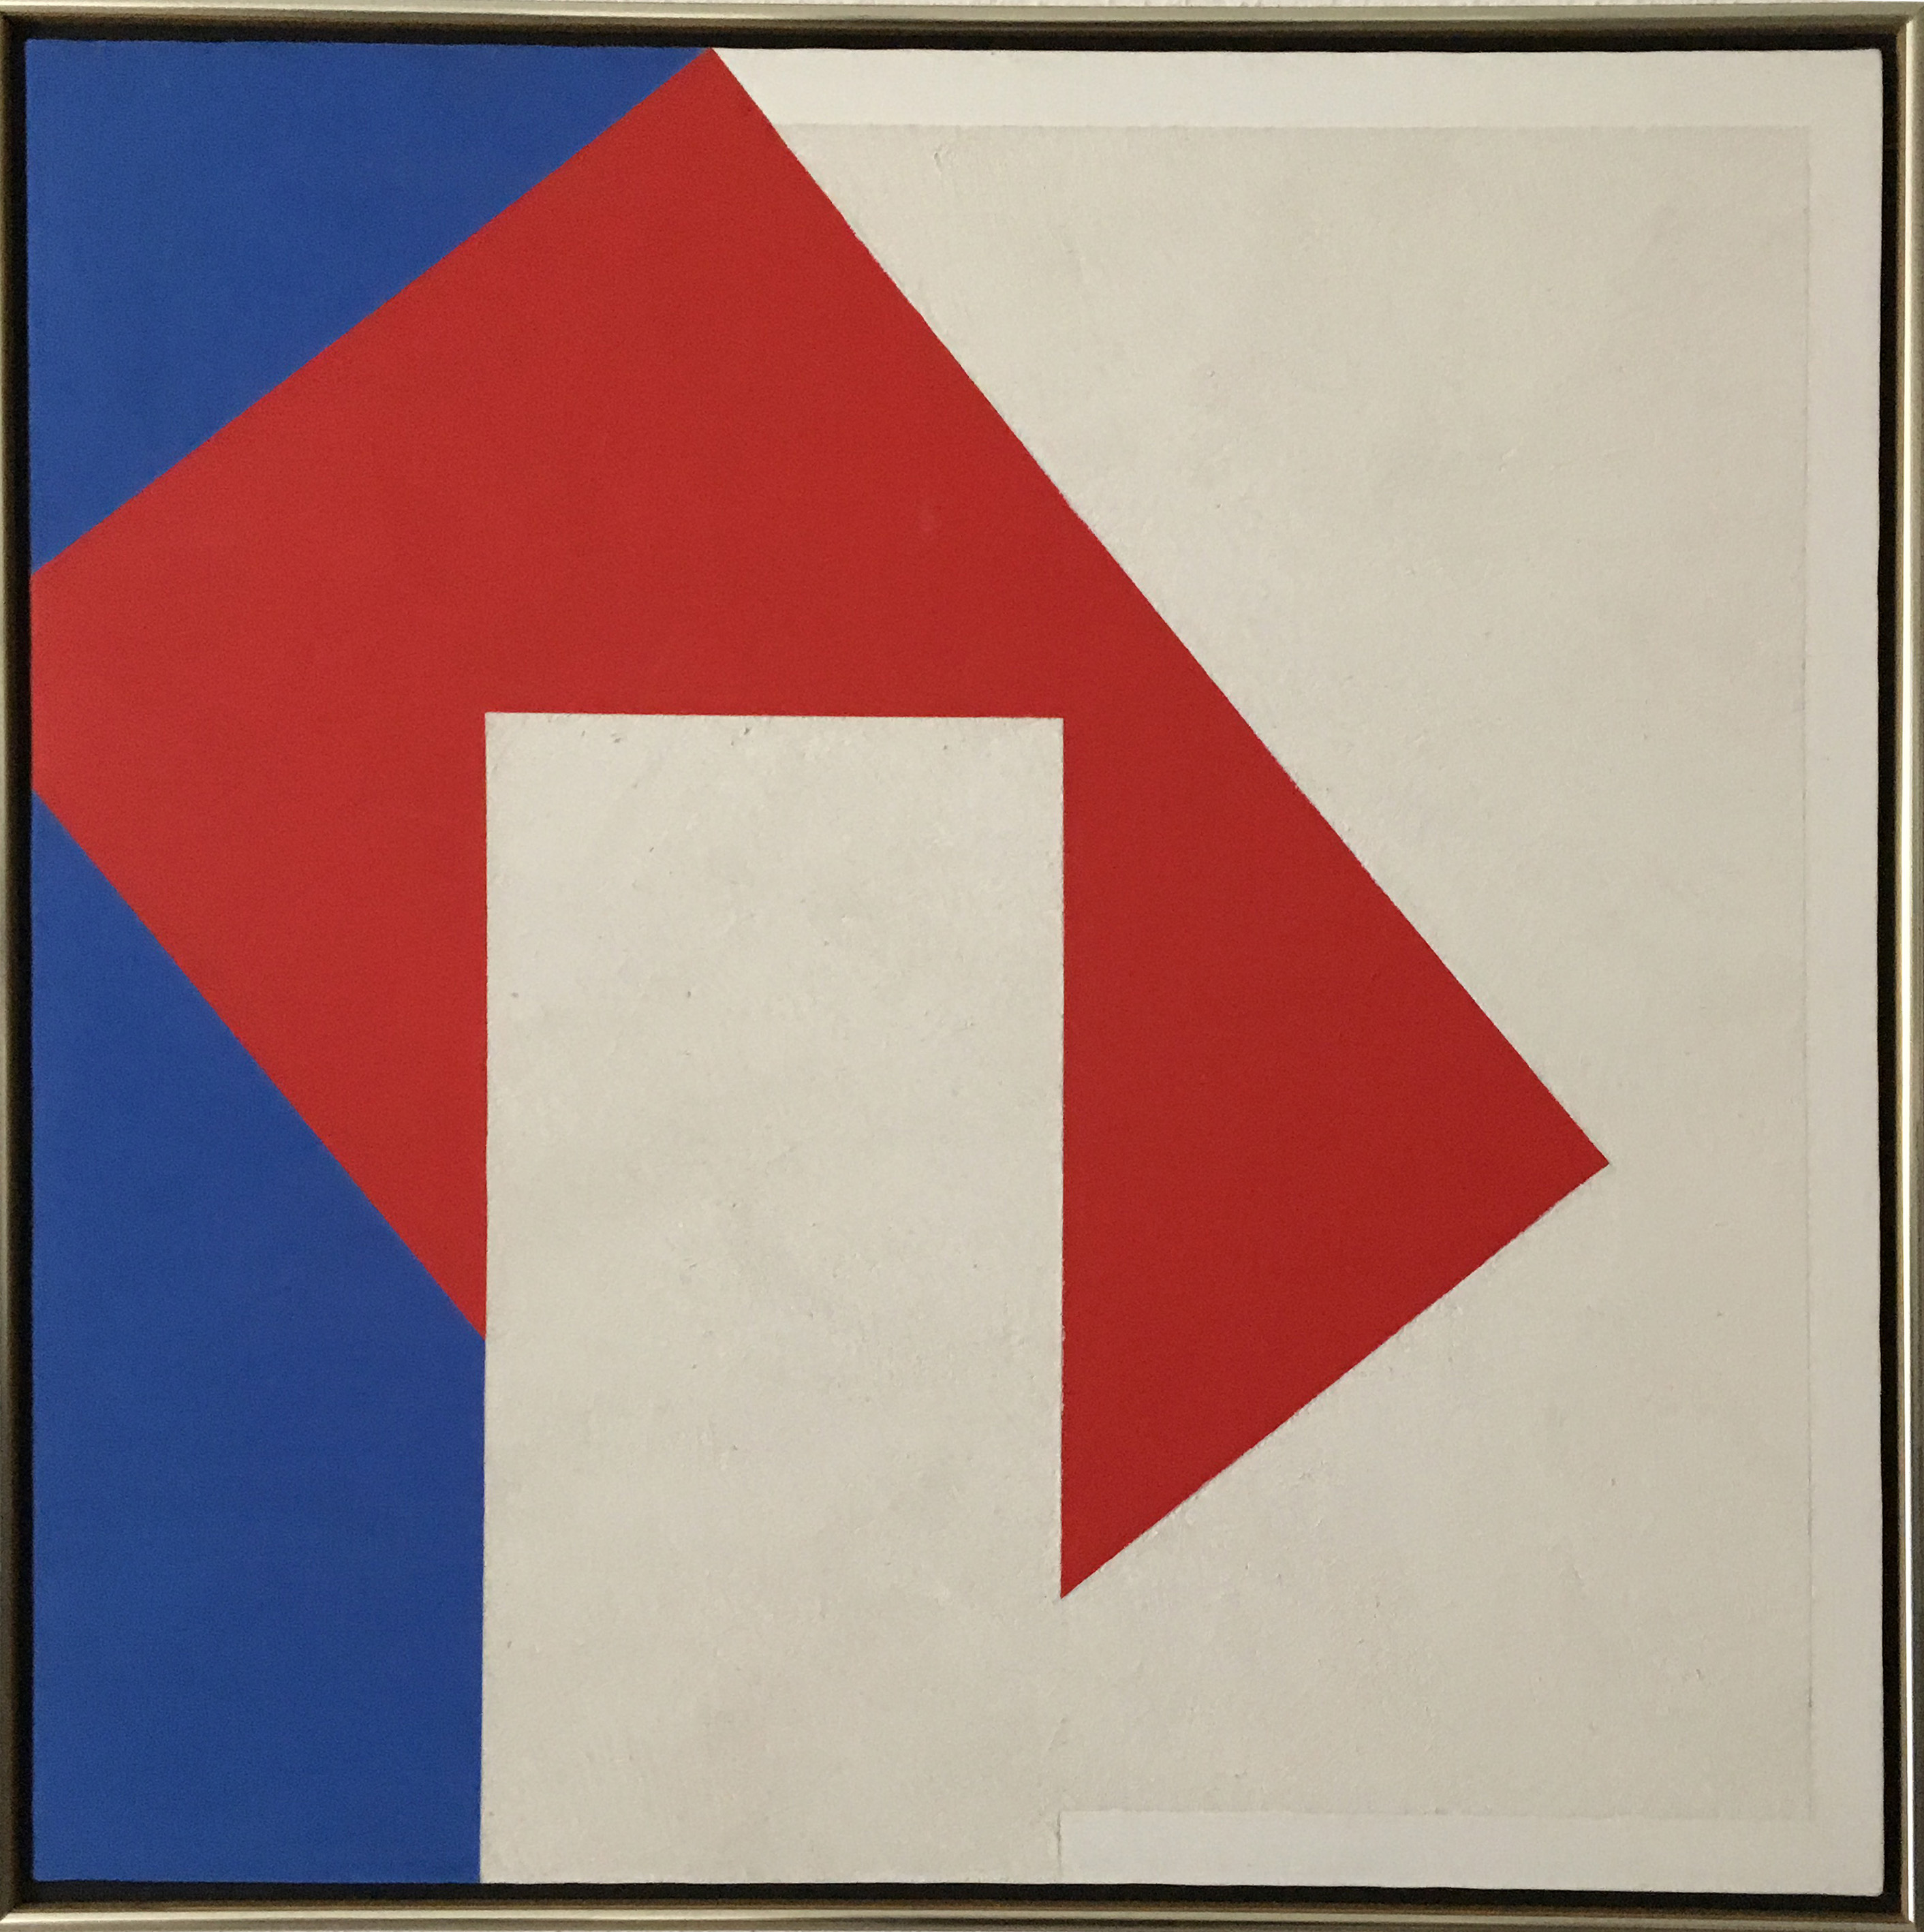 “Red, White & Blue”, Geometric abstraction with sand